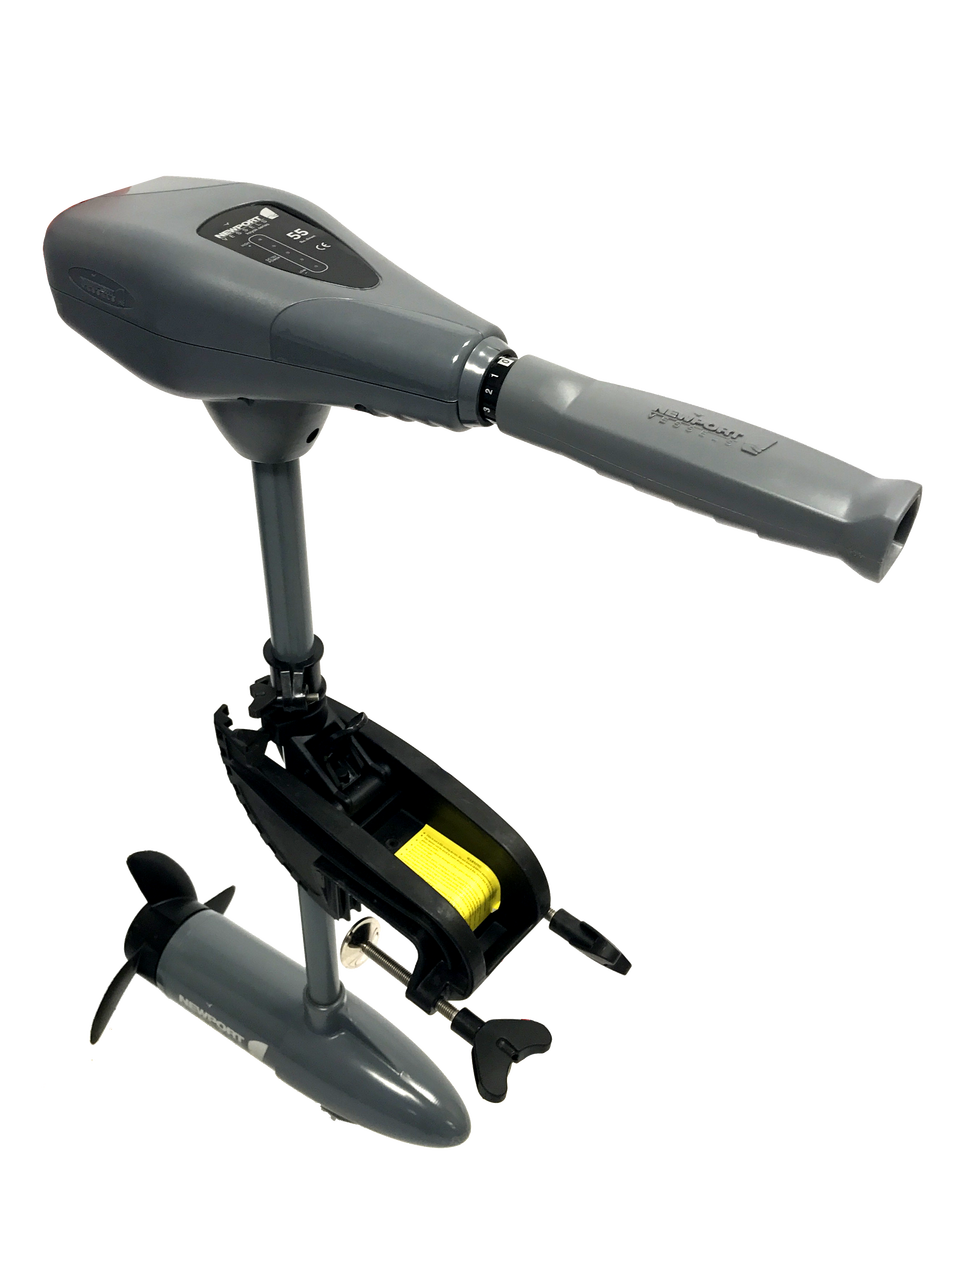 Newport Vessels Kayak Series 55 Lb. Thrust Saltwater Transom Mounted Electric Kayak Trolling Motor with 24 In. Shaft - image 5 of 8